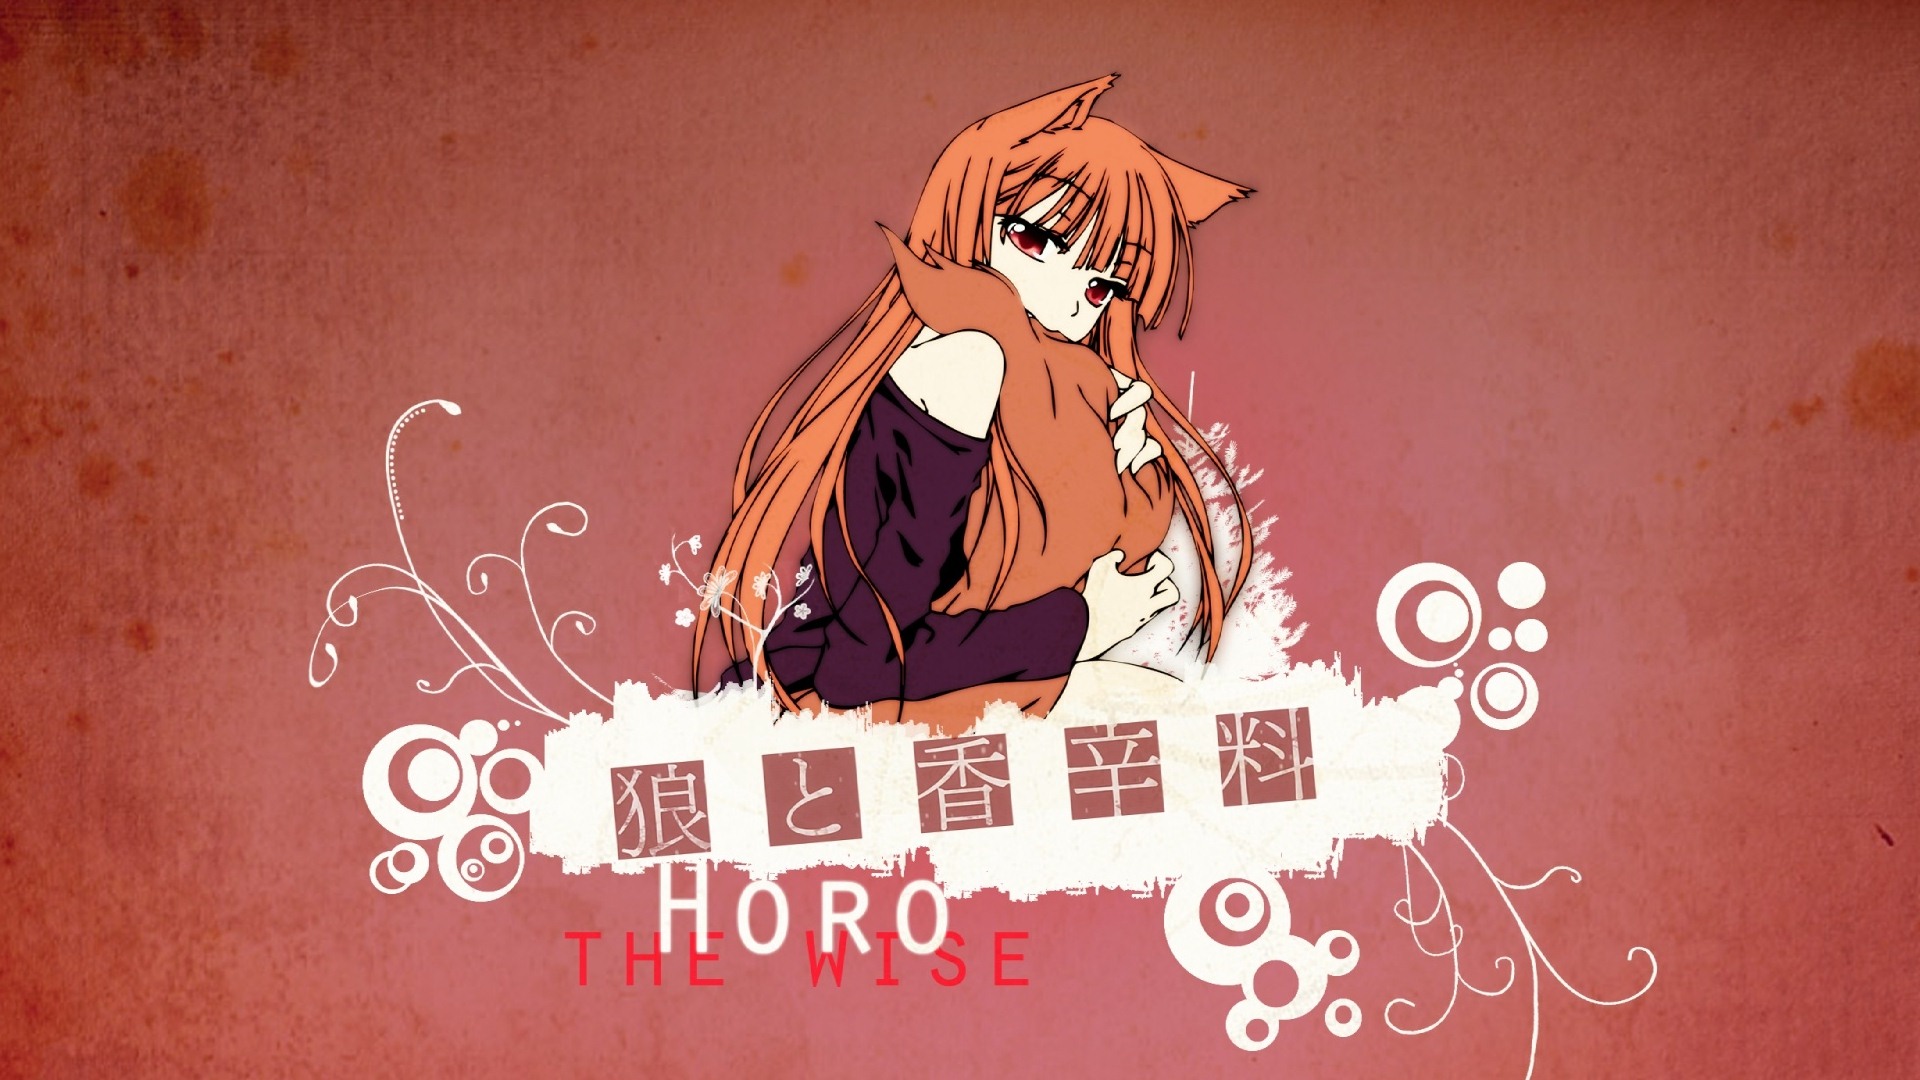 Spice and Wolf HD wallpapers #6 - 1920x1080